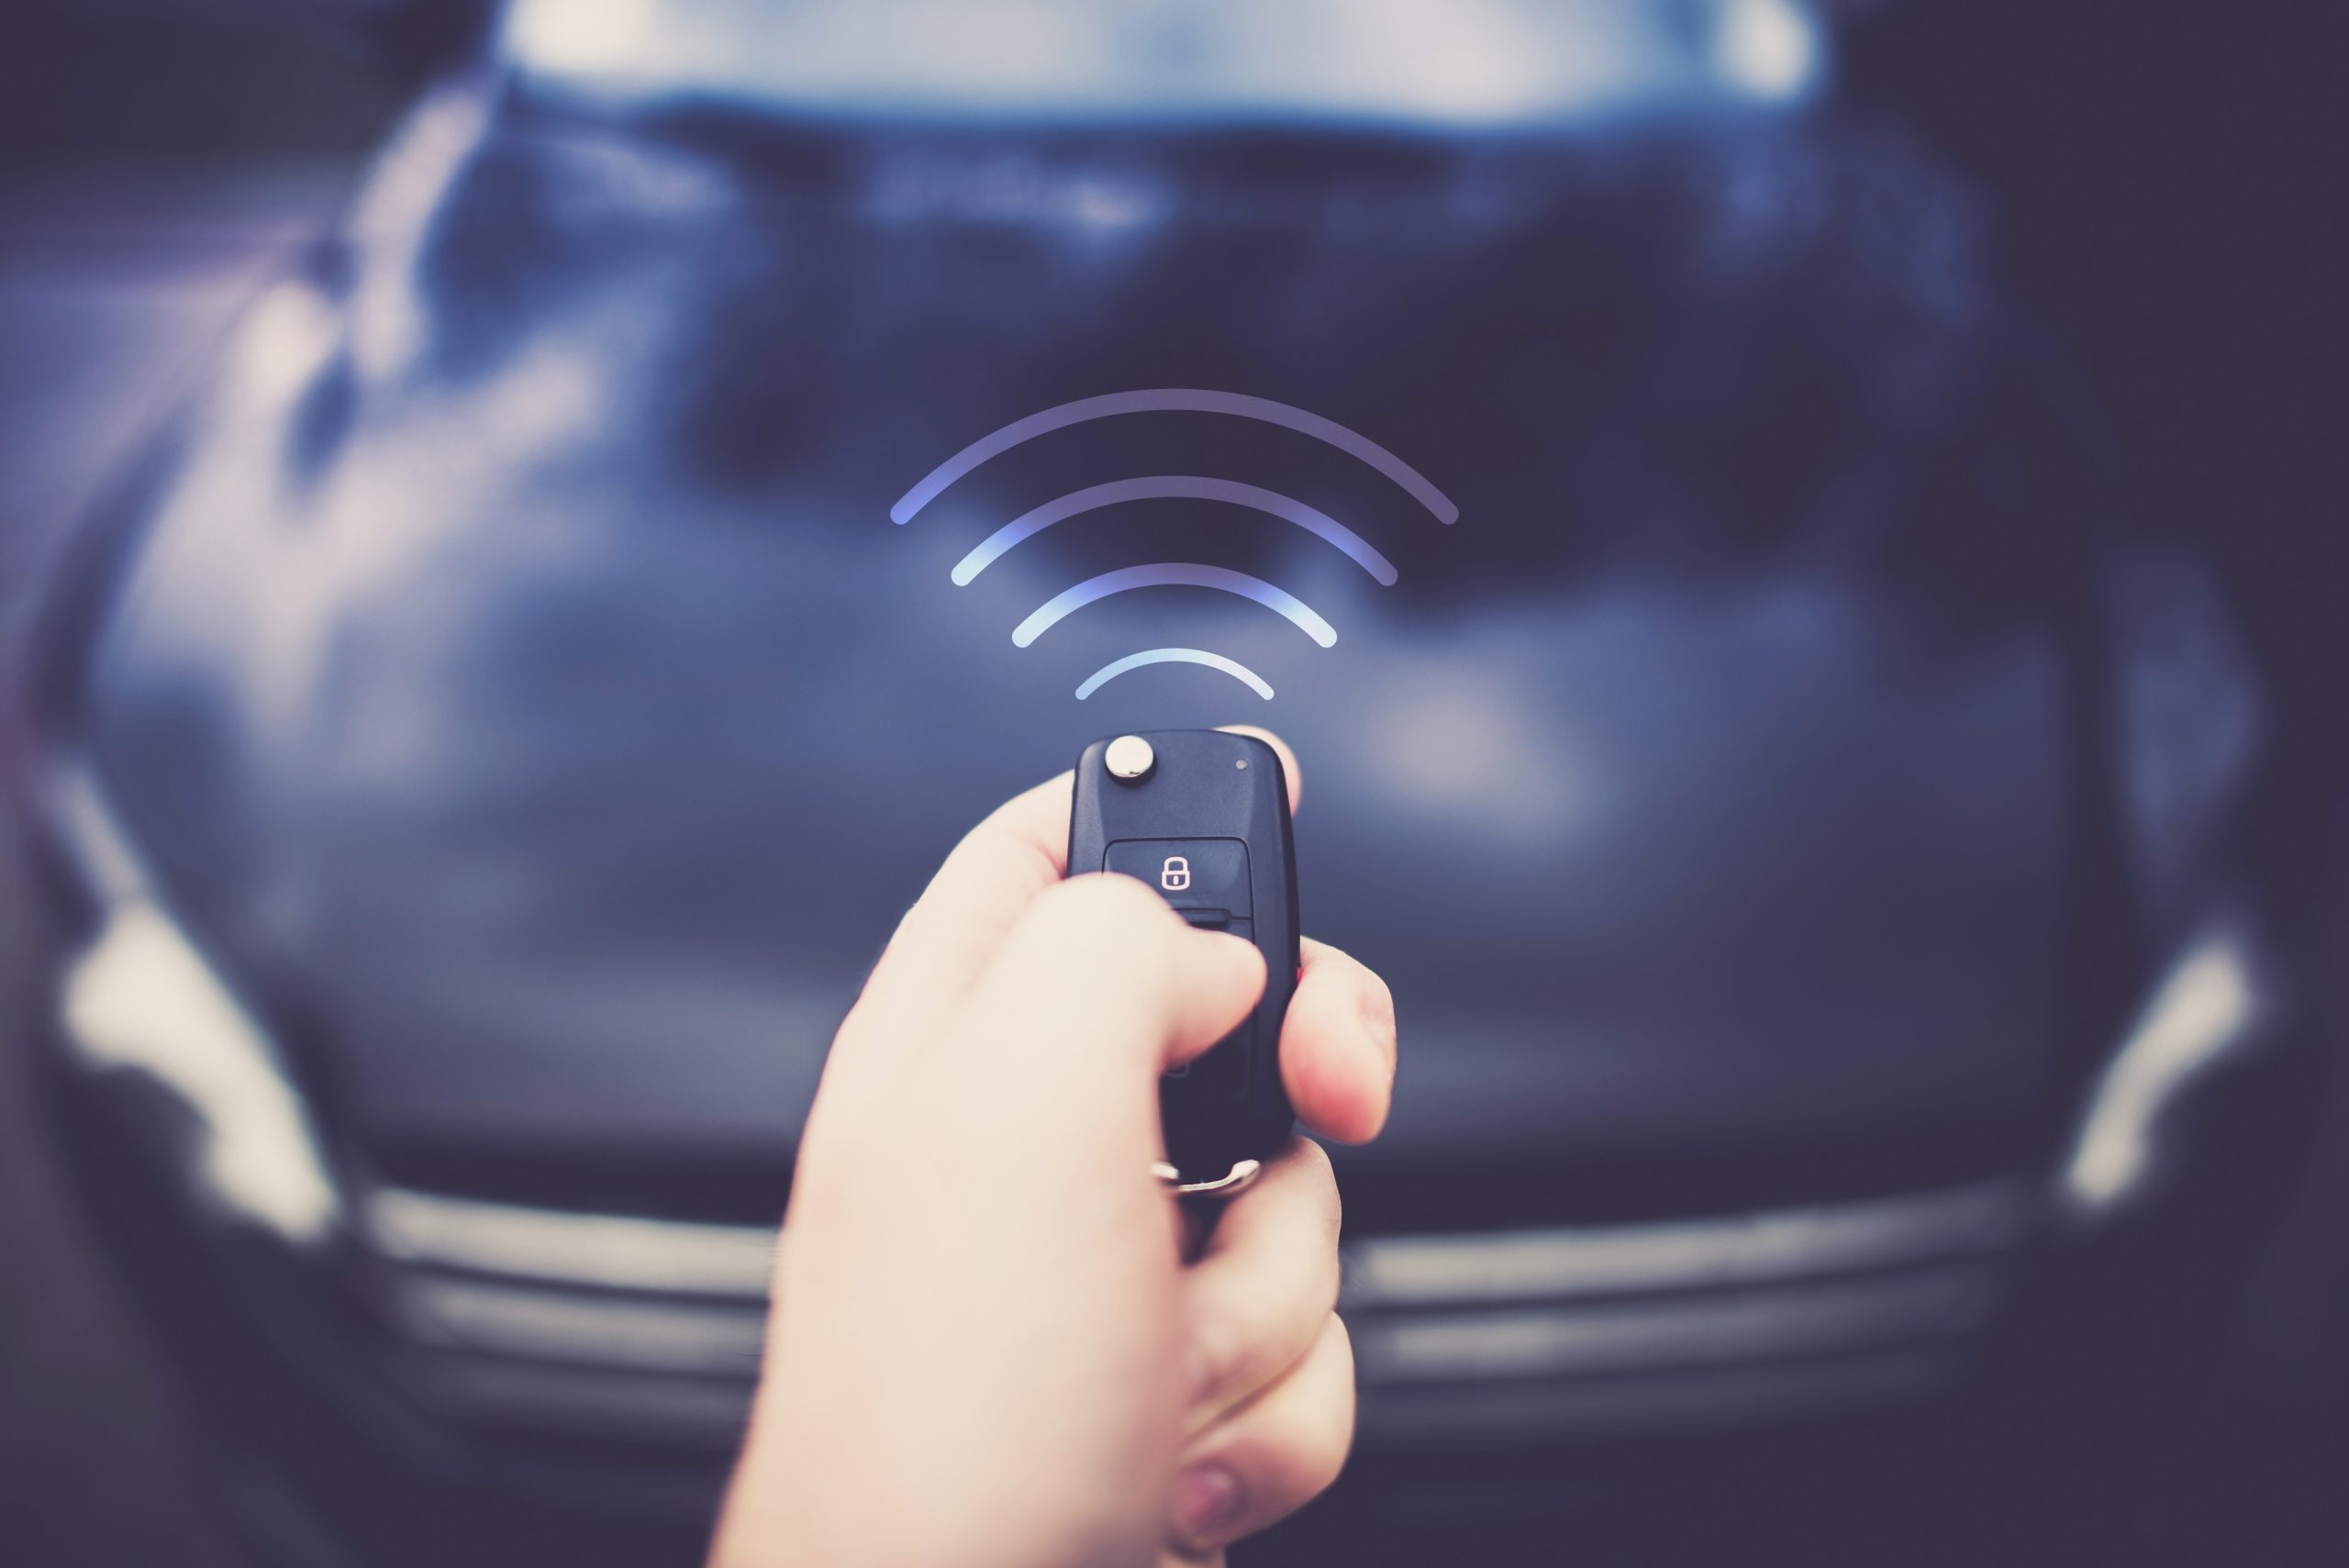 Top tips for everyday vehicle security